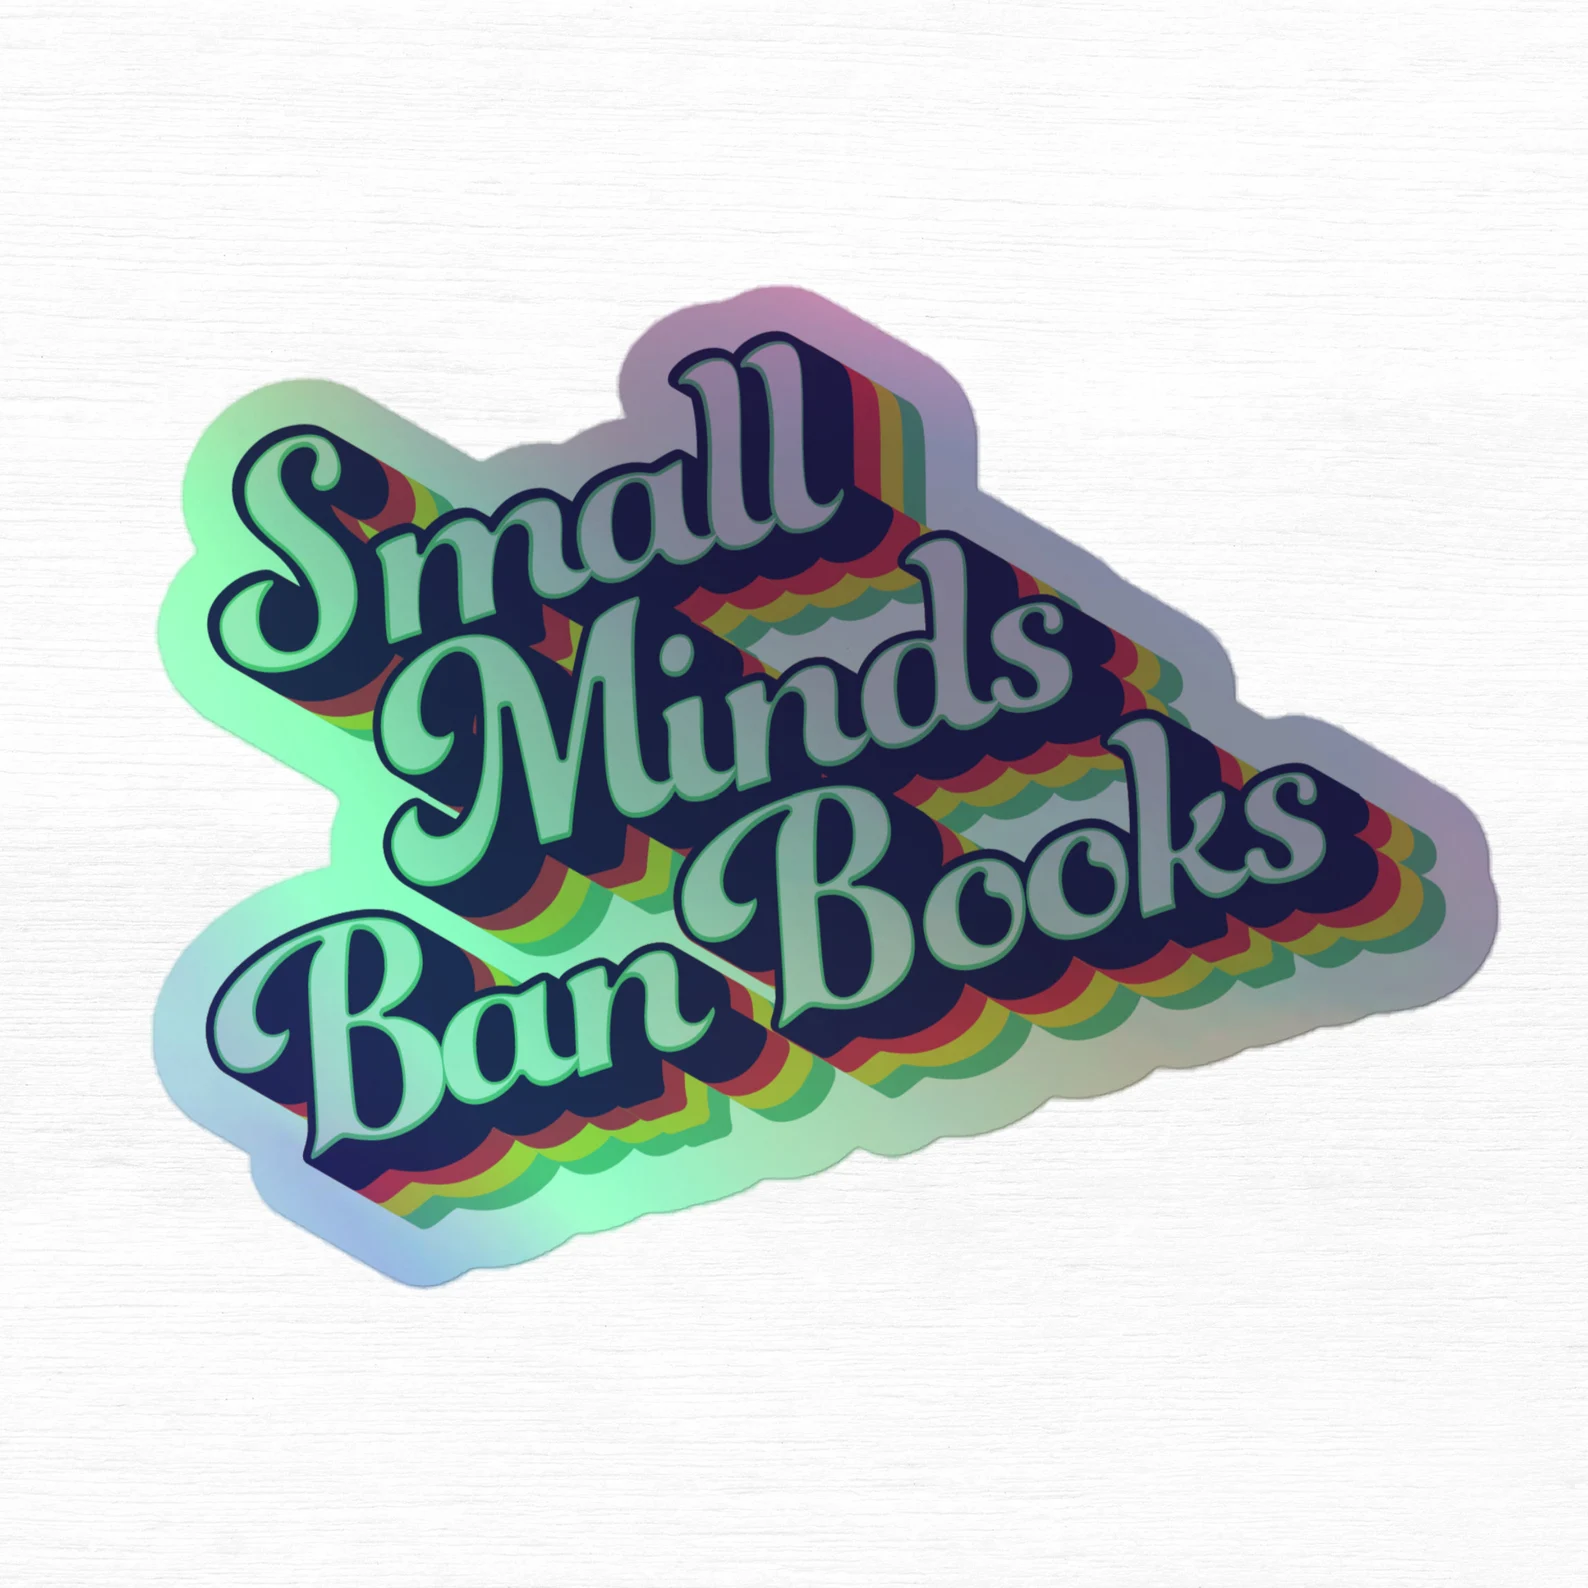 holographic sticker reading "small minds ban books."